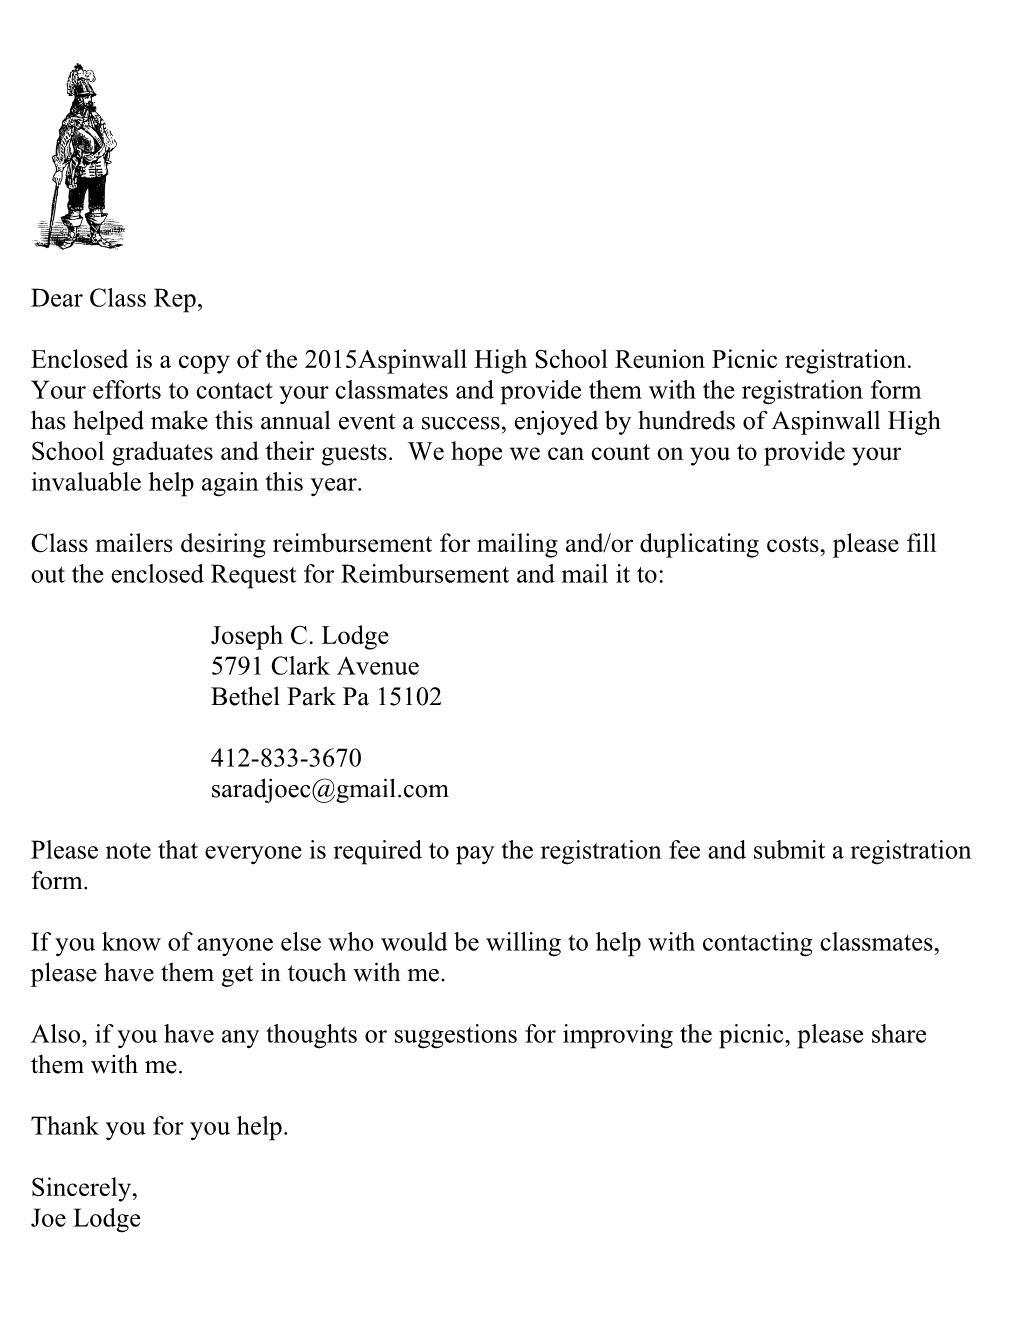 Enclosed Is a Copy of the 2015Aspinwall High School Reunion Picnic Registration